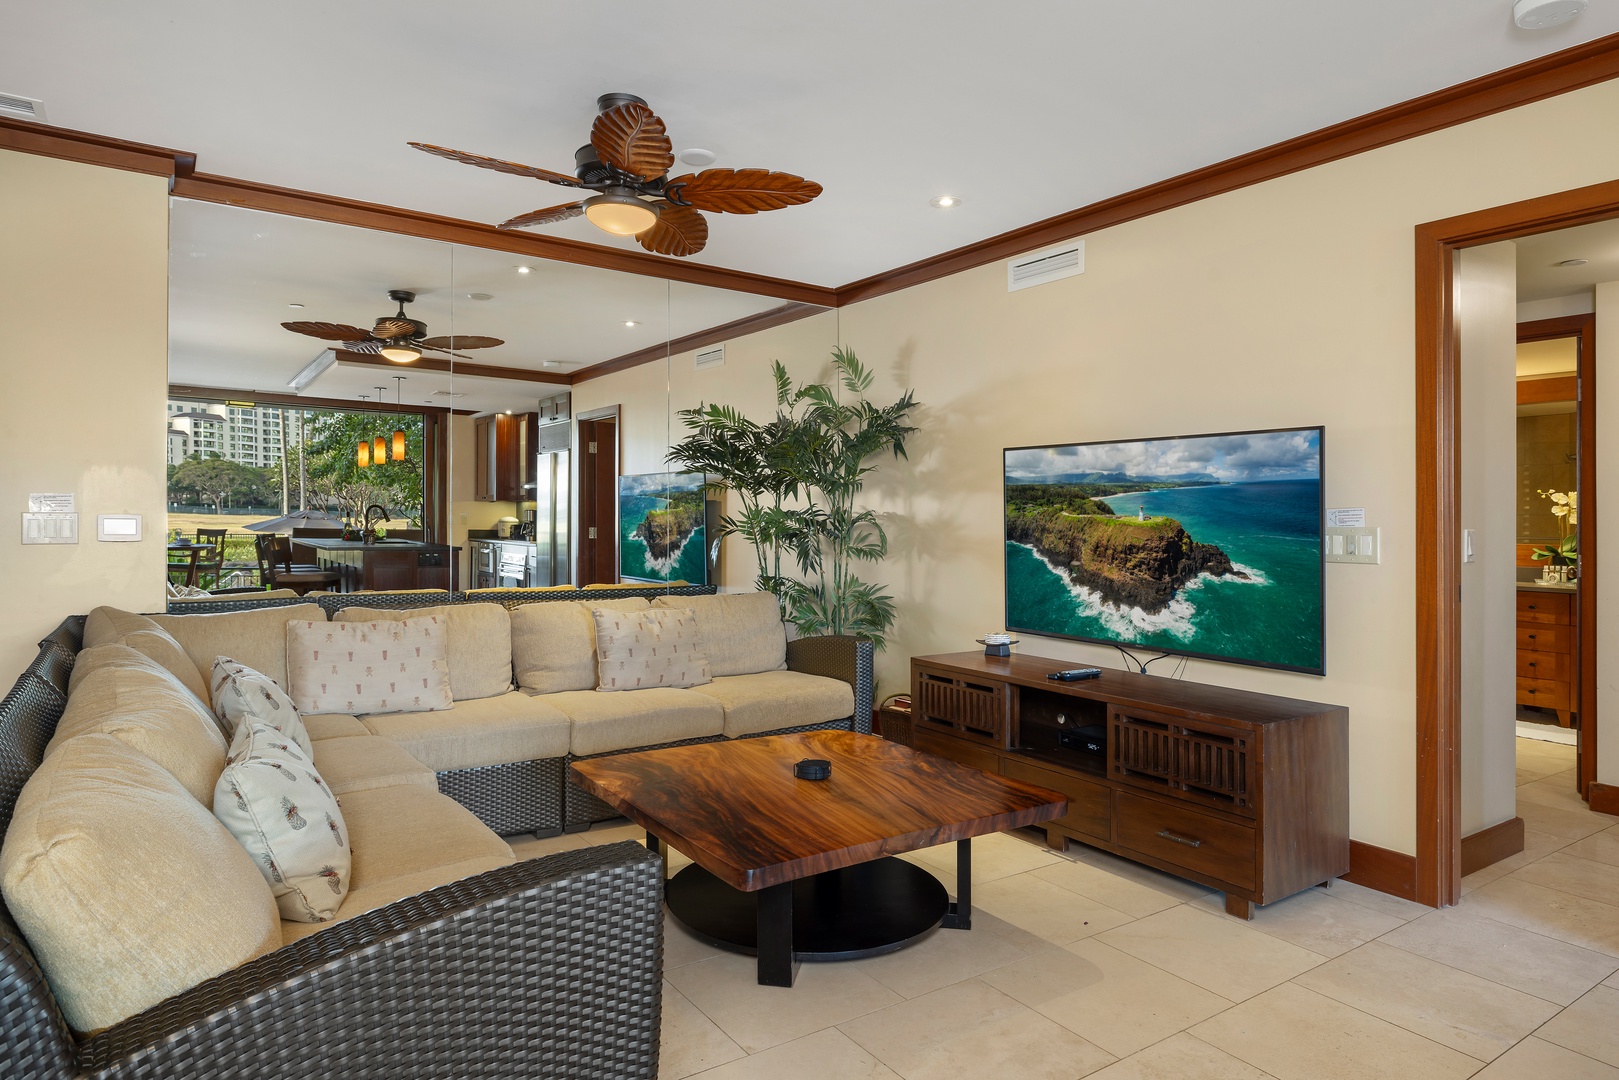 Kapolei Vacation Rentals, Ko Olina Beach Villas B107 - Enjoy the big game or a family movie night after some fun in the sun.